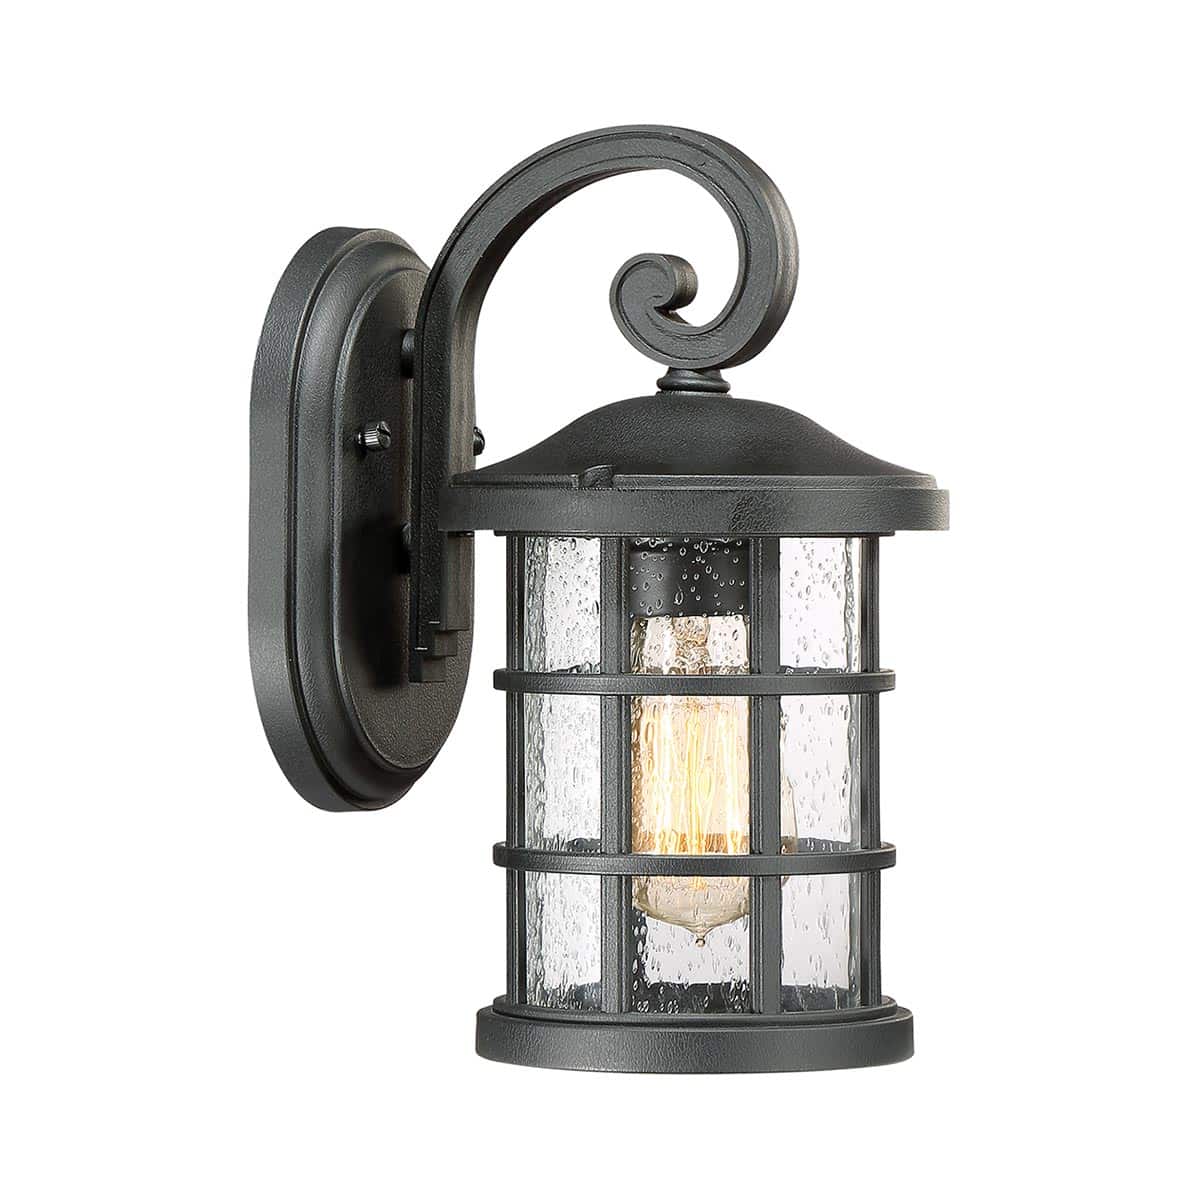 Quoizel Crusade Black 1 Light Small Outdoor Wall Lantern Seeded Glass